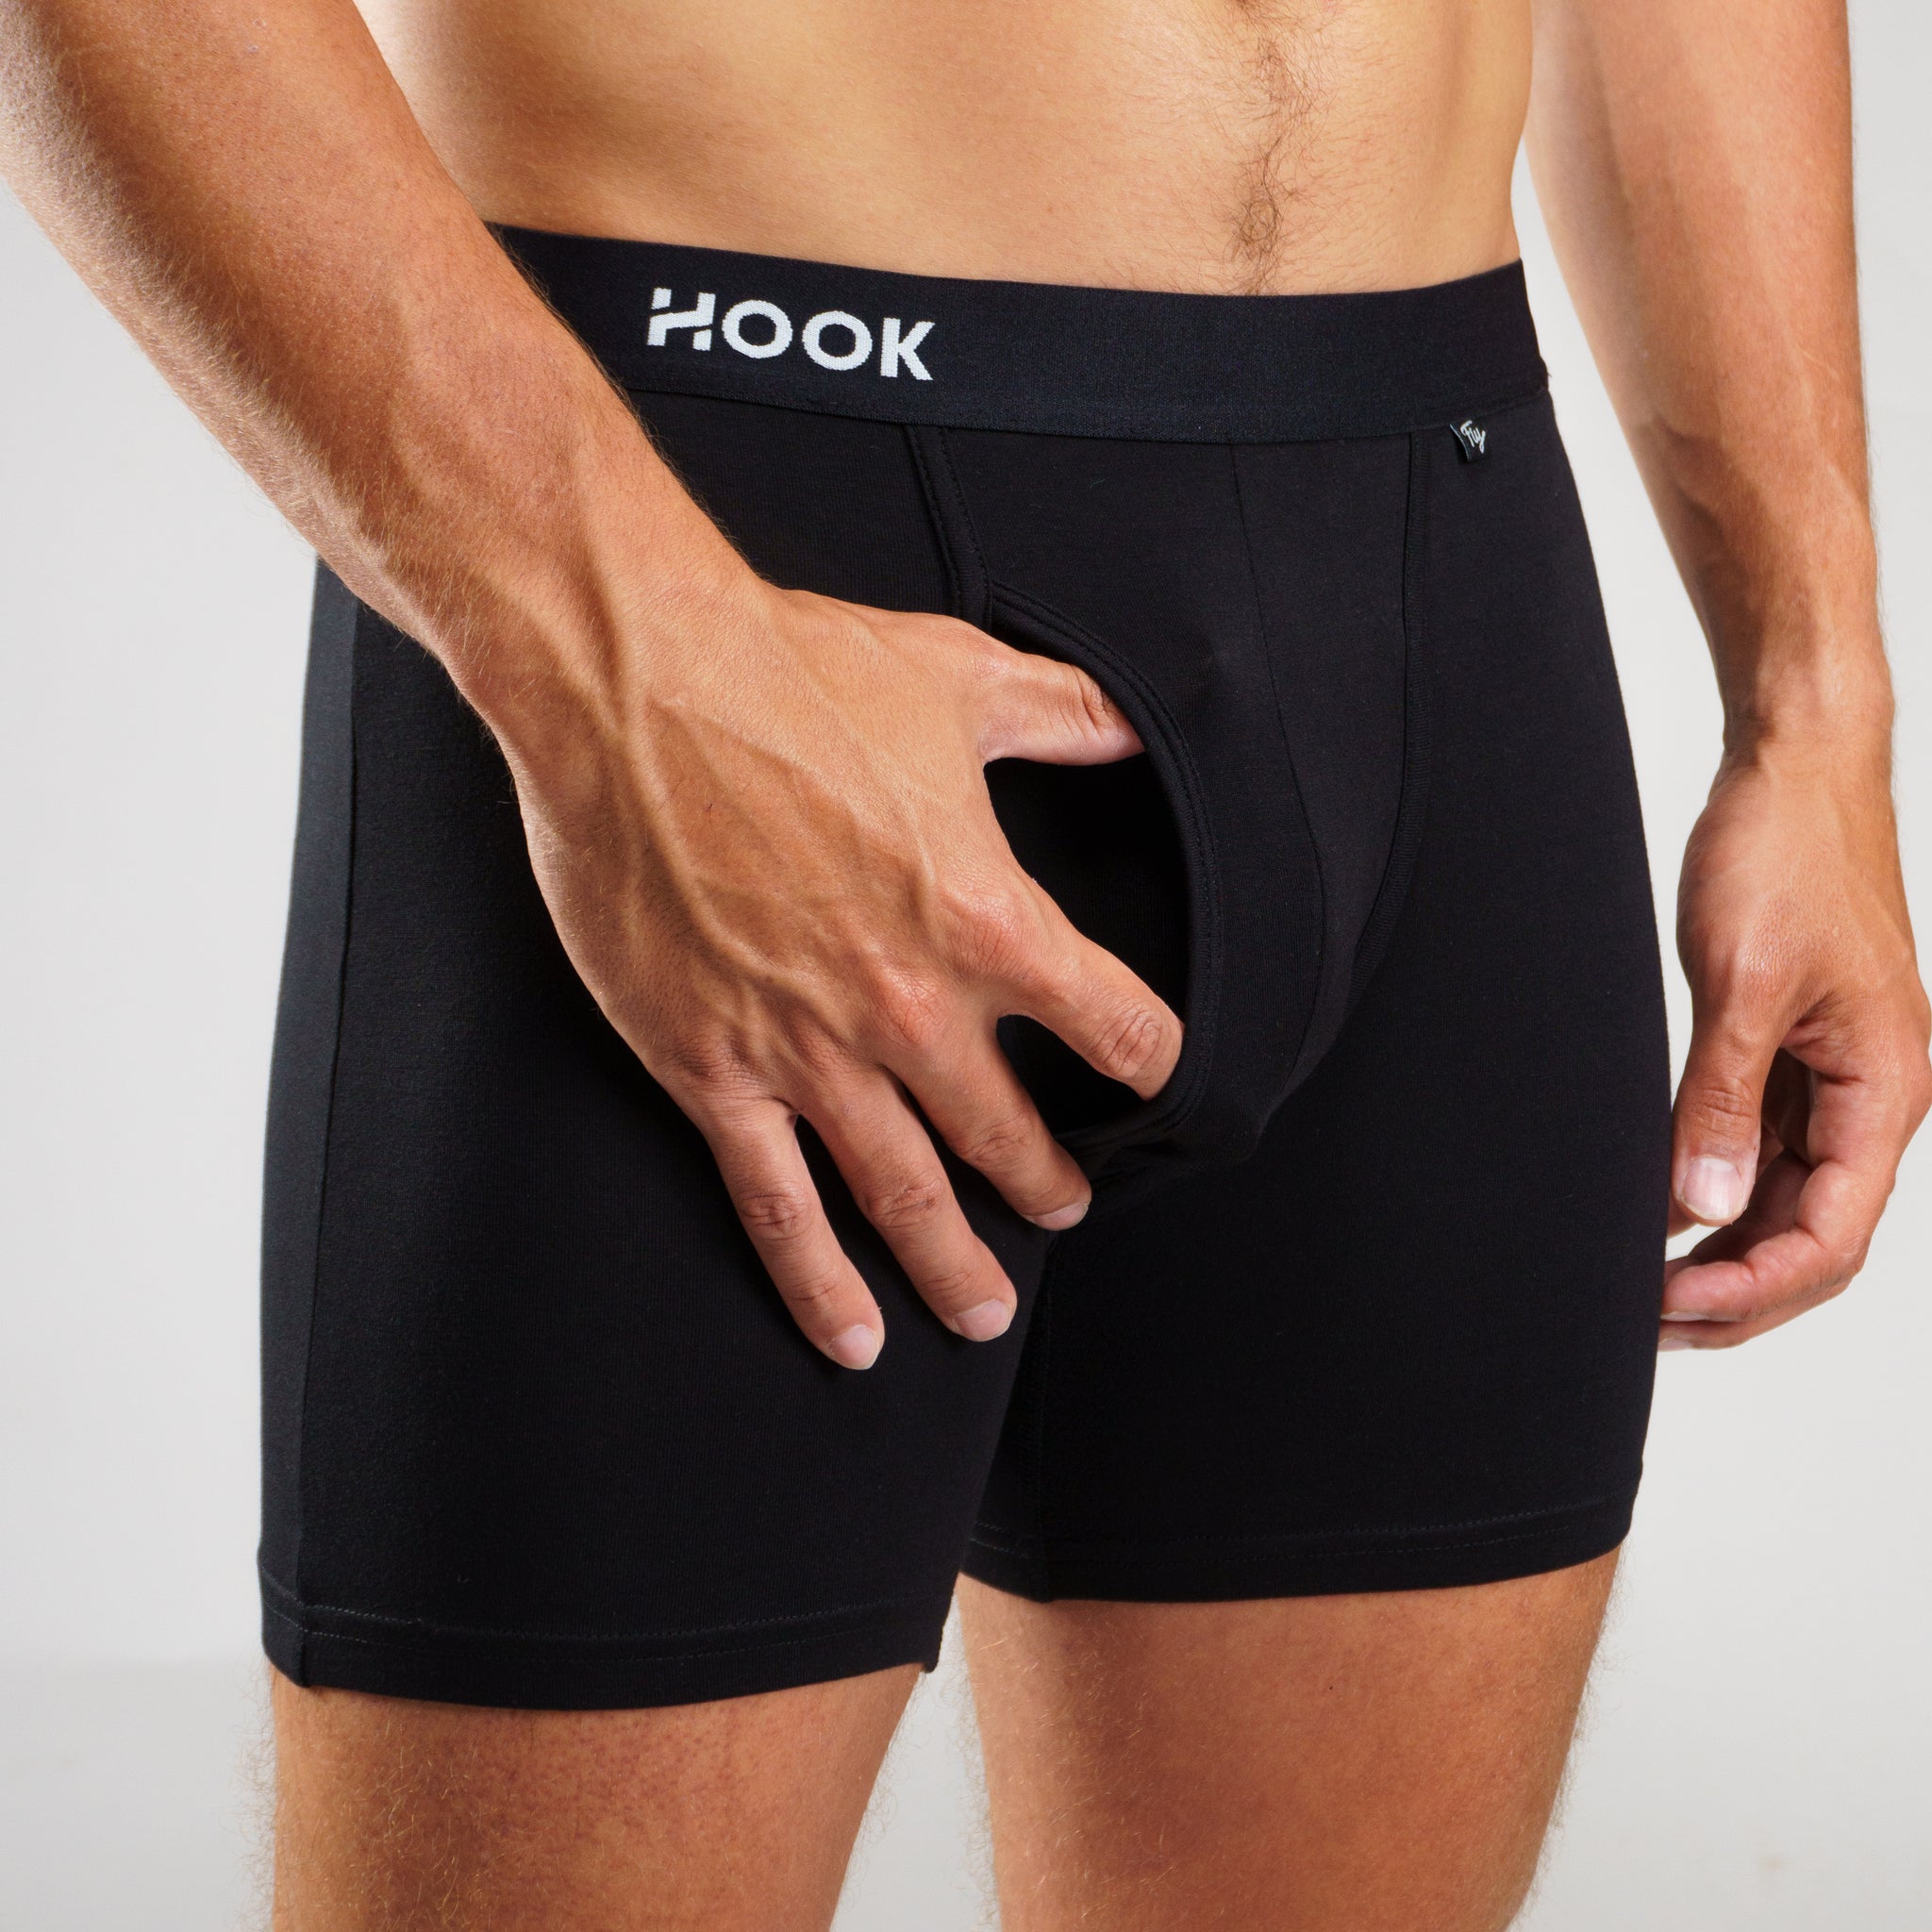 Fly Boxer Brief : Black, Navy, Grey 5 Pack